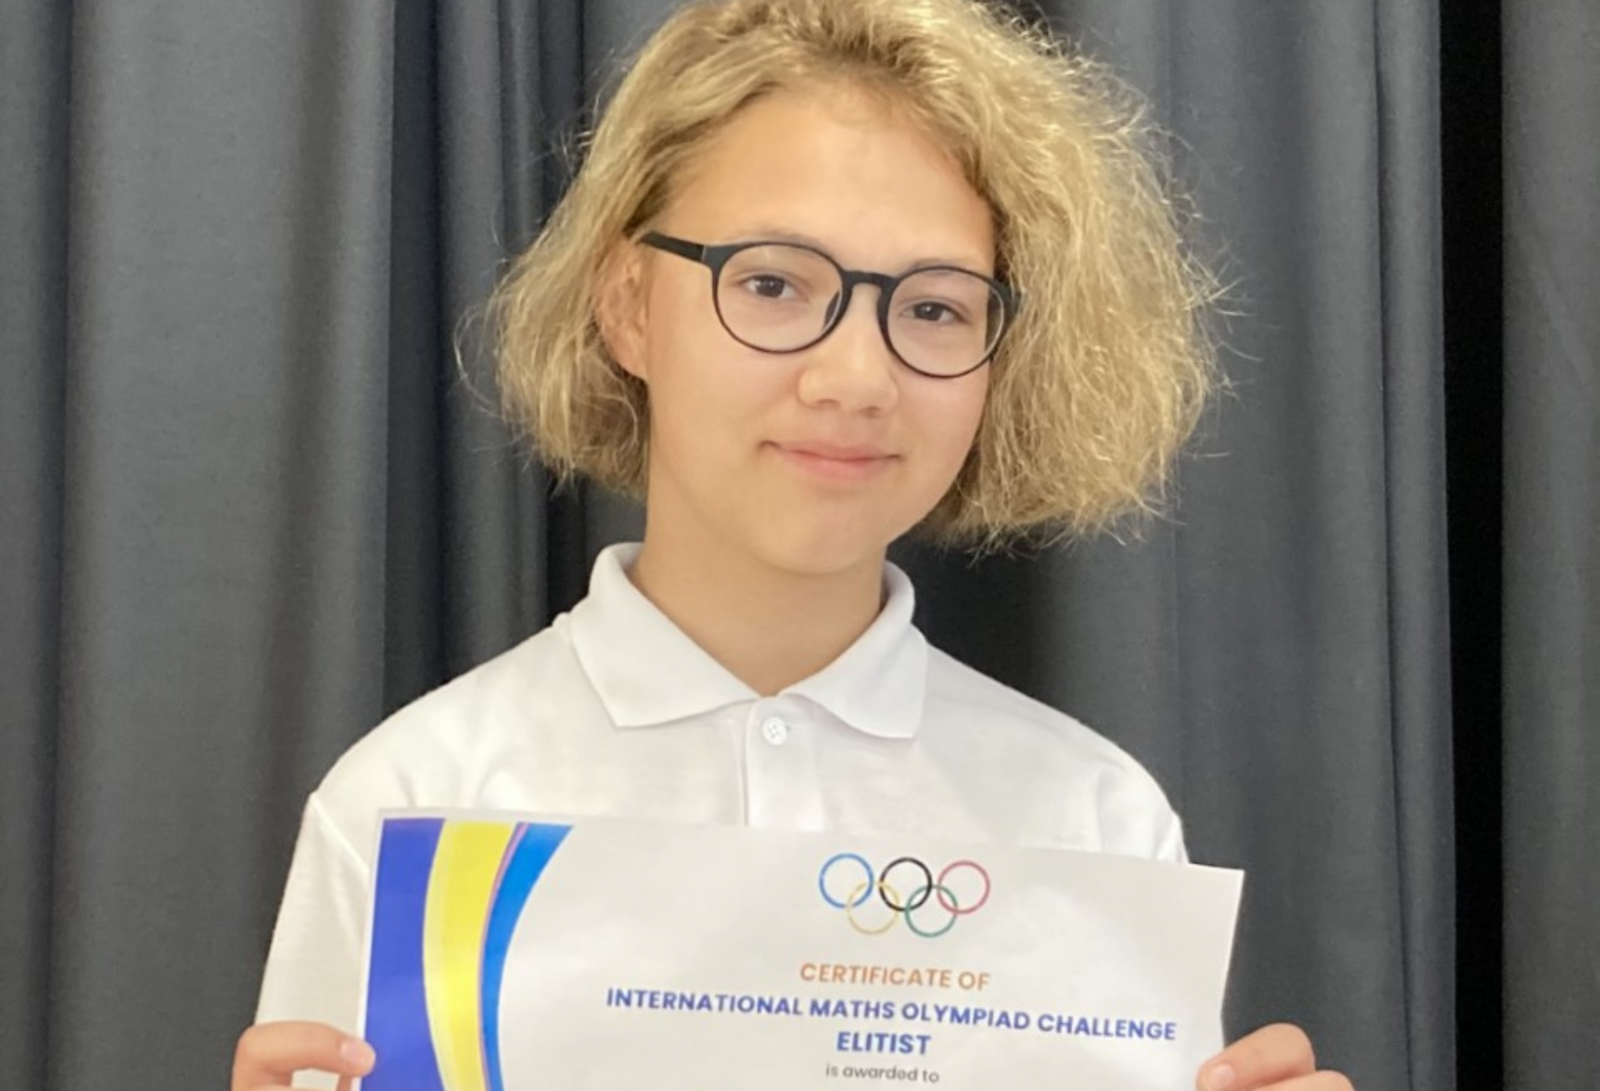 East Finchley pupil wins International Maths Olympiad Elitist title - Diocese of Westminster